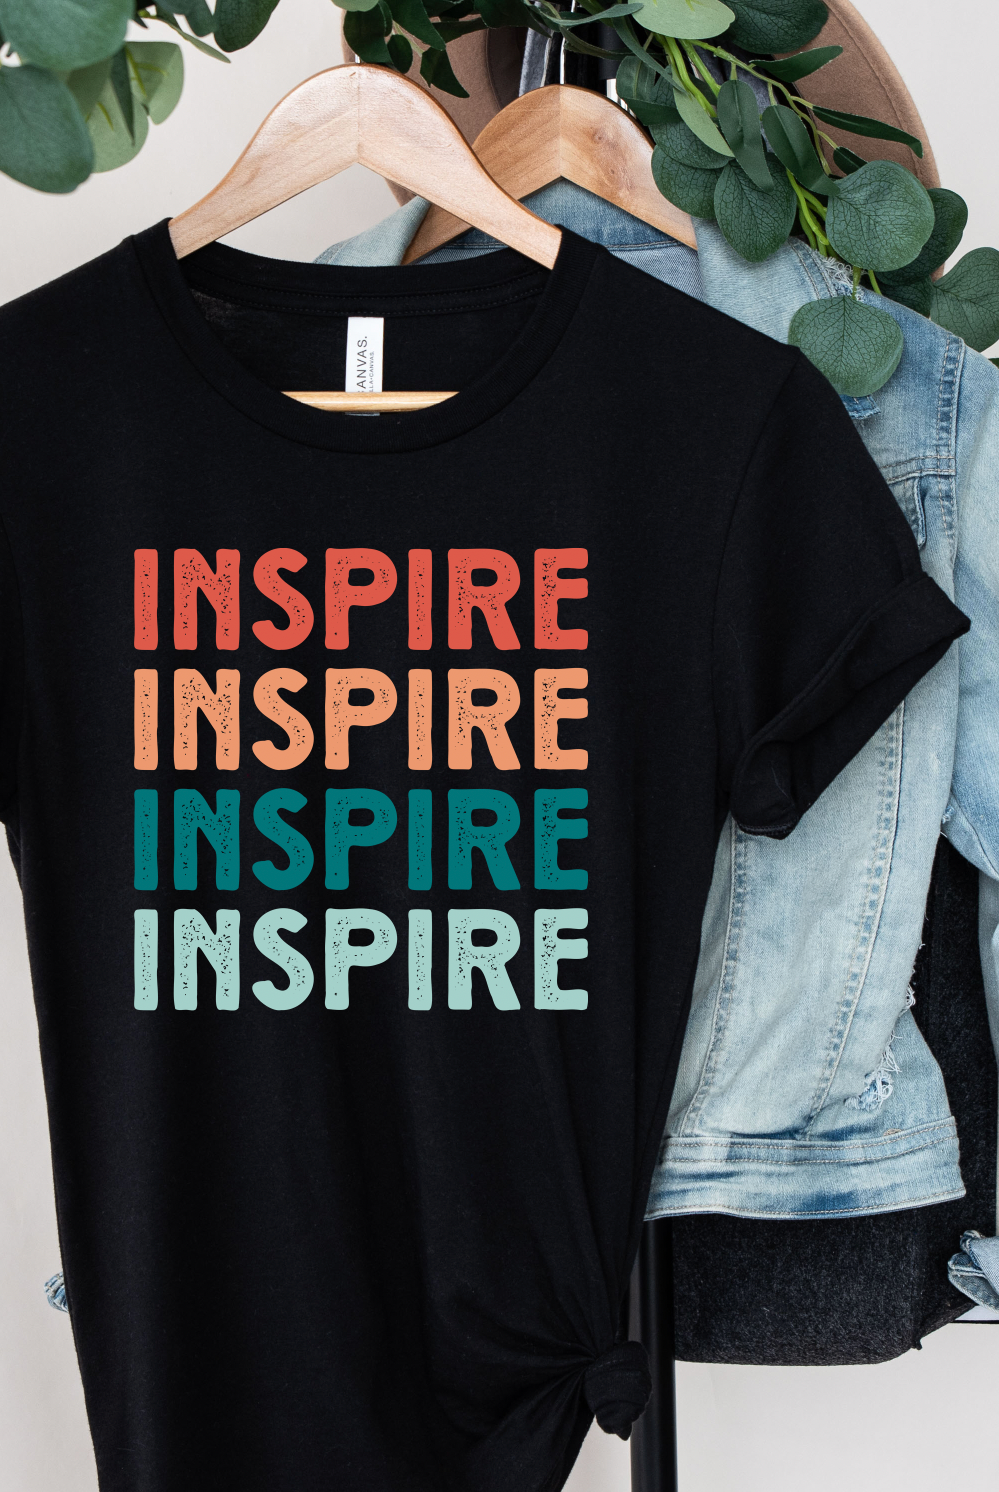 Inspire t-shirt in multiple colors. Country western vibe ladies unisex t-shirt from Bella and Canvas. Black shirt.